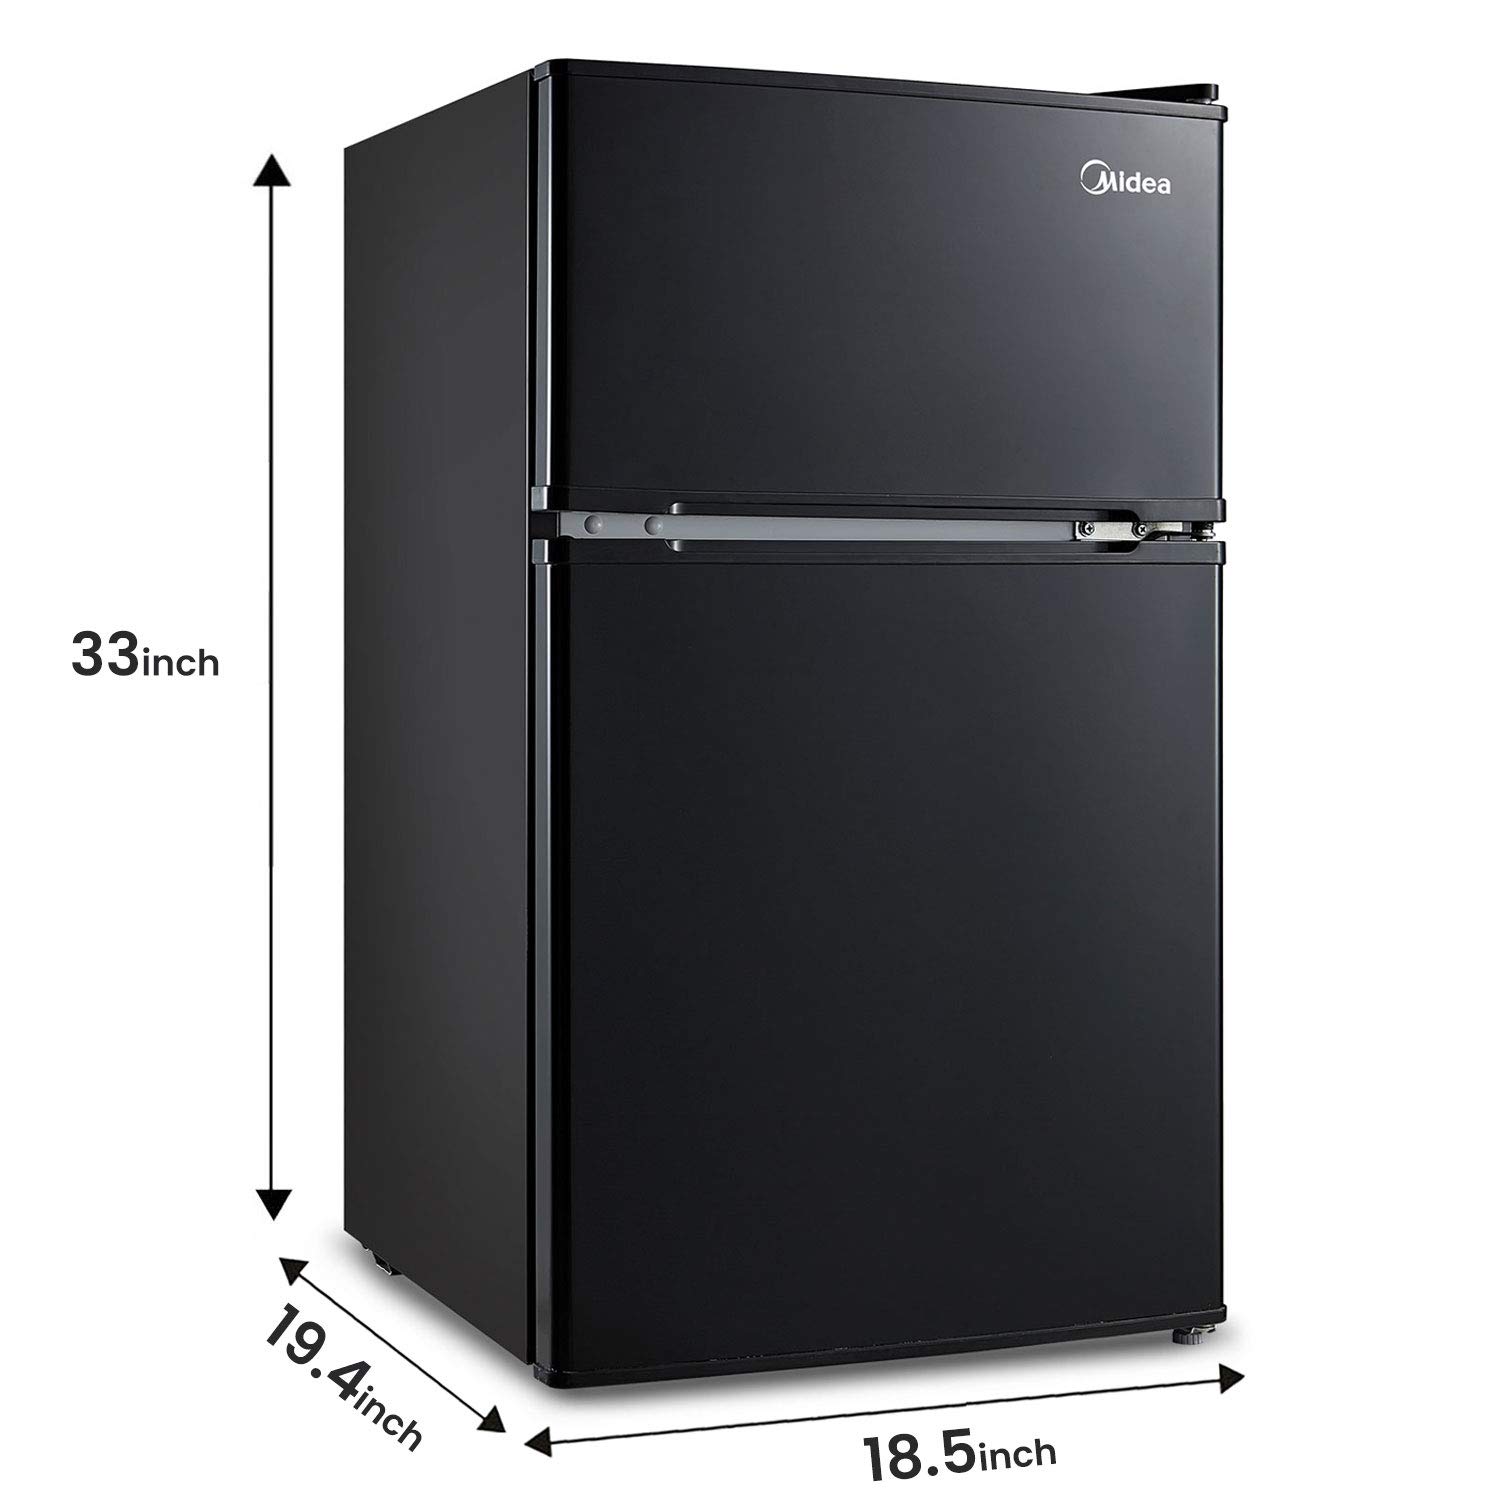 Midea WHD-113FB1 Double Door Mini Fridge with Freezer for Bedroom Office or Dorm, 3.1 cu ft, Black & BLACK+DECKER Digital Microwave Oven with Turntable Push-Button Door, Stainless Steel, 0.9 Cu Ft